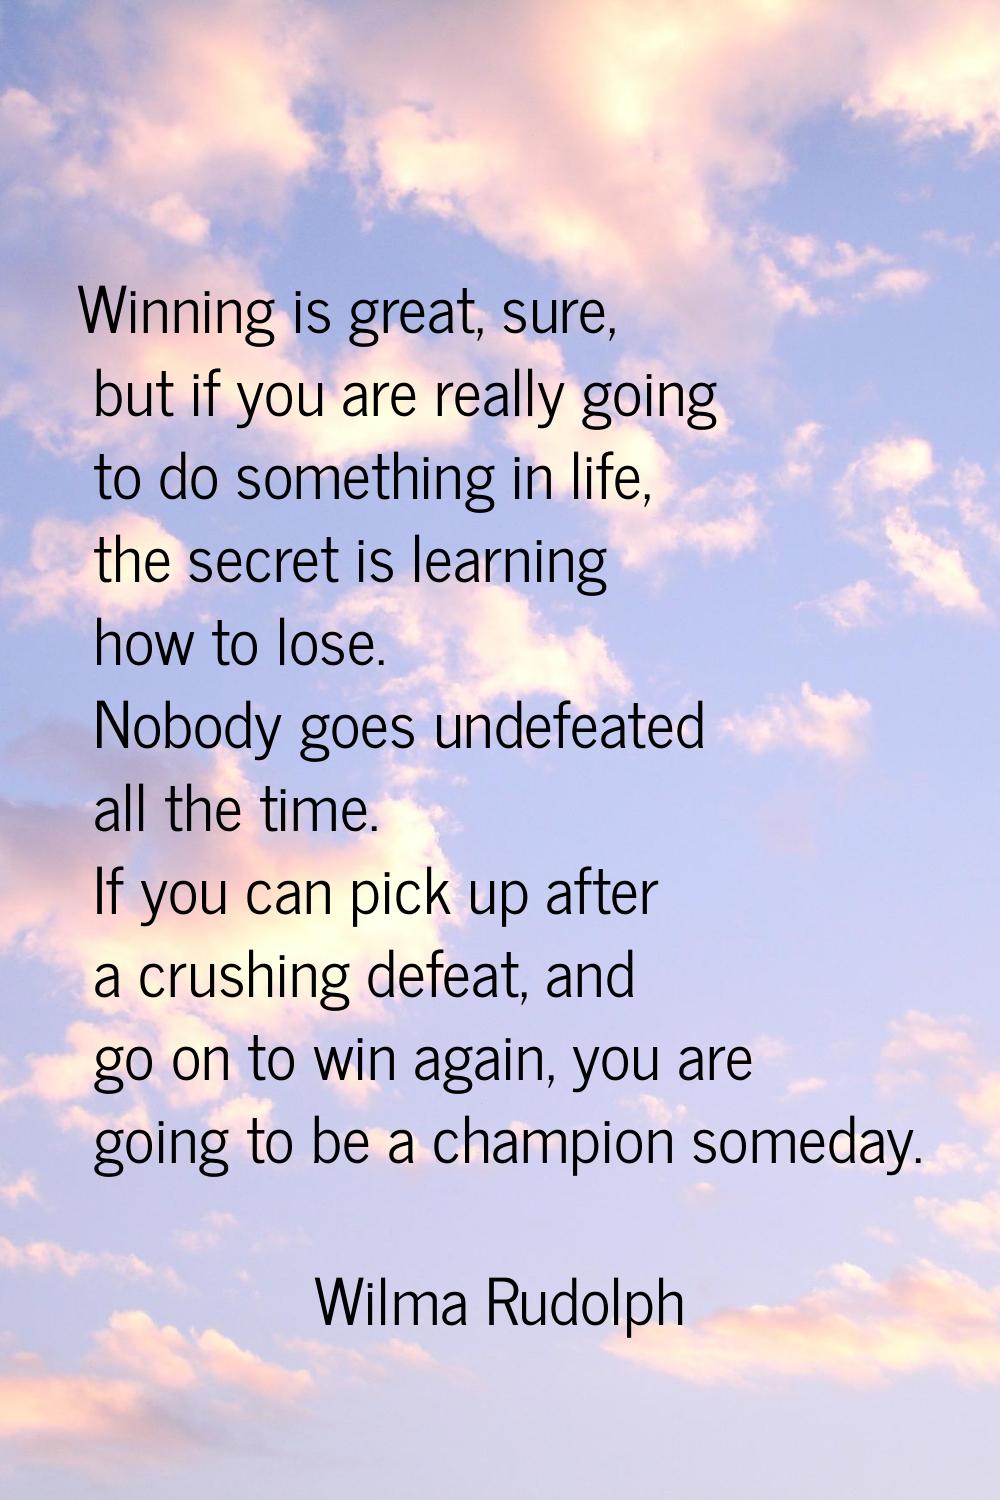 Winning is great, sure, but if you are really going to do something in life, the secret is learning